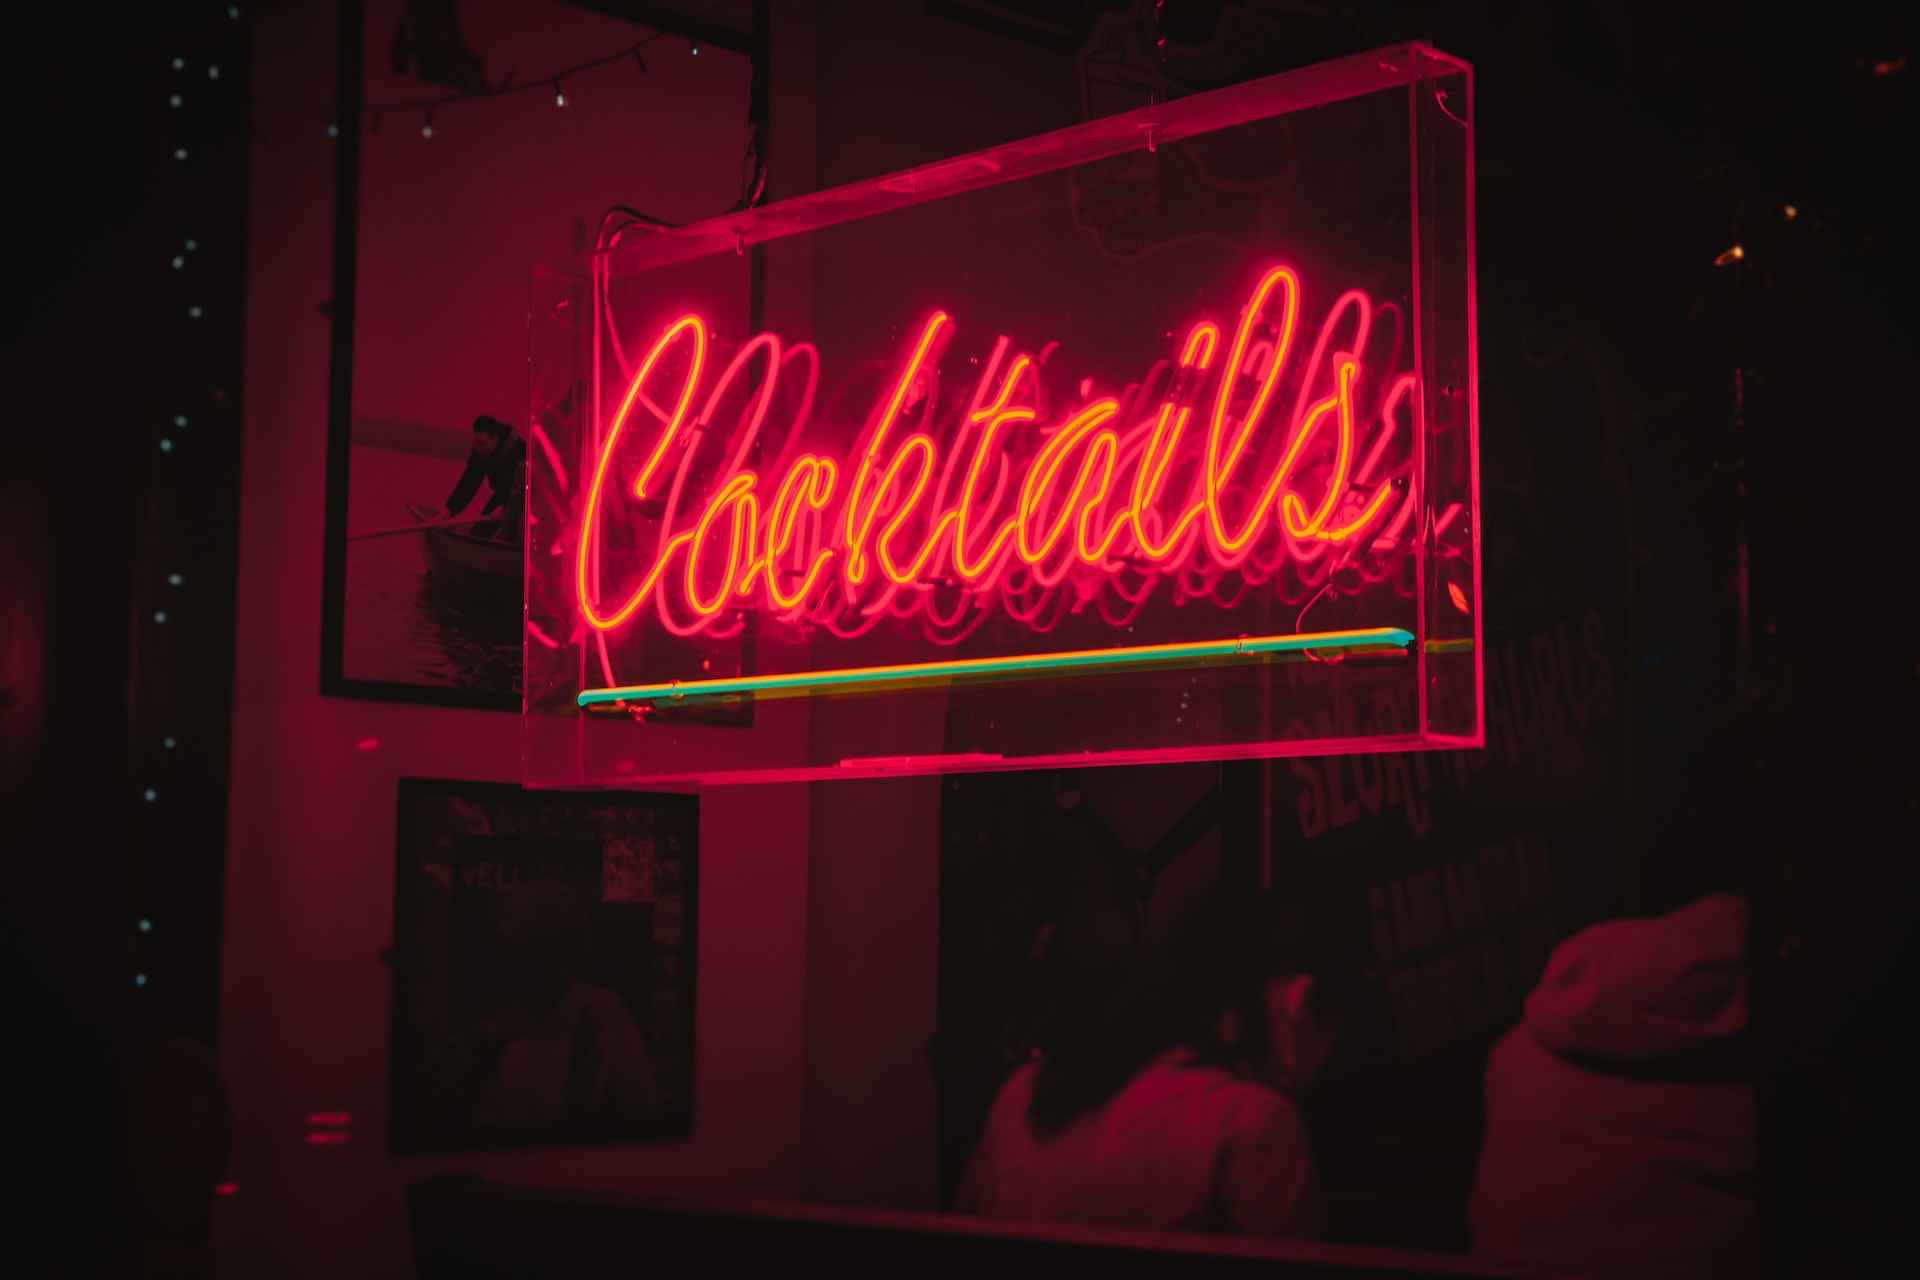 Neon sign in red that reads "Cocktails"